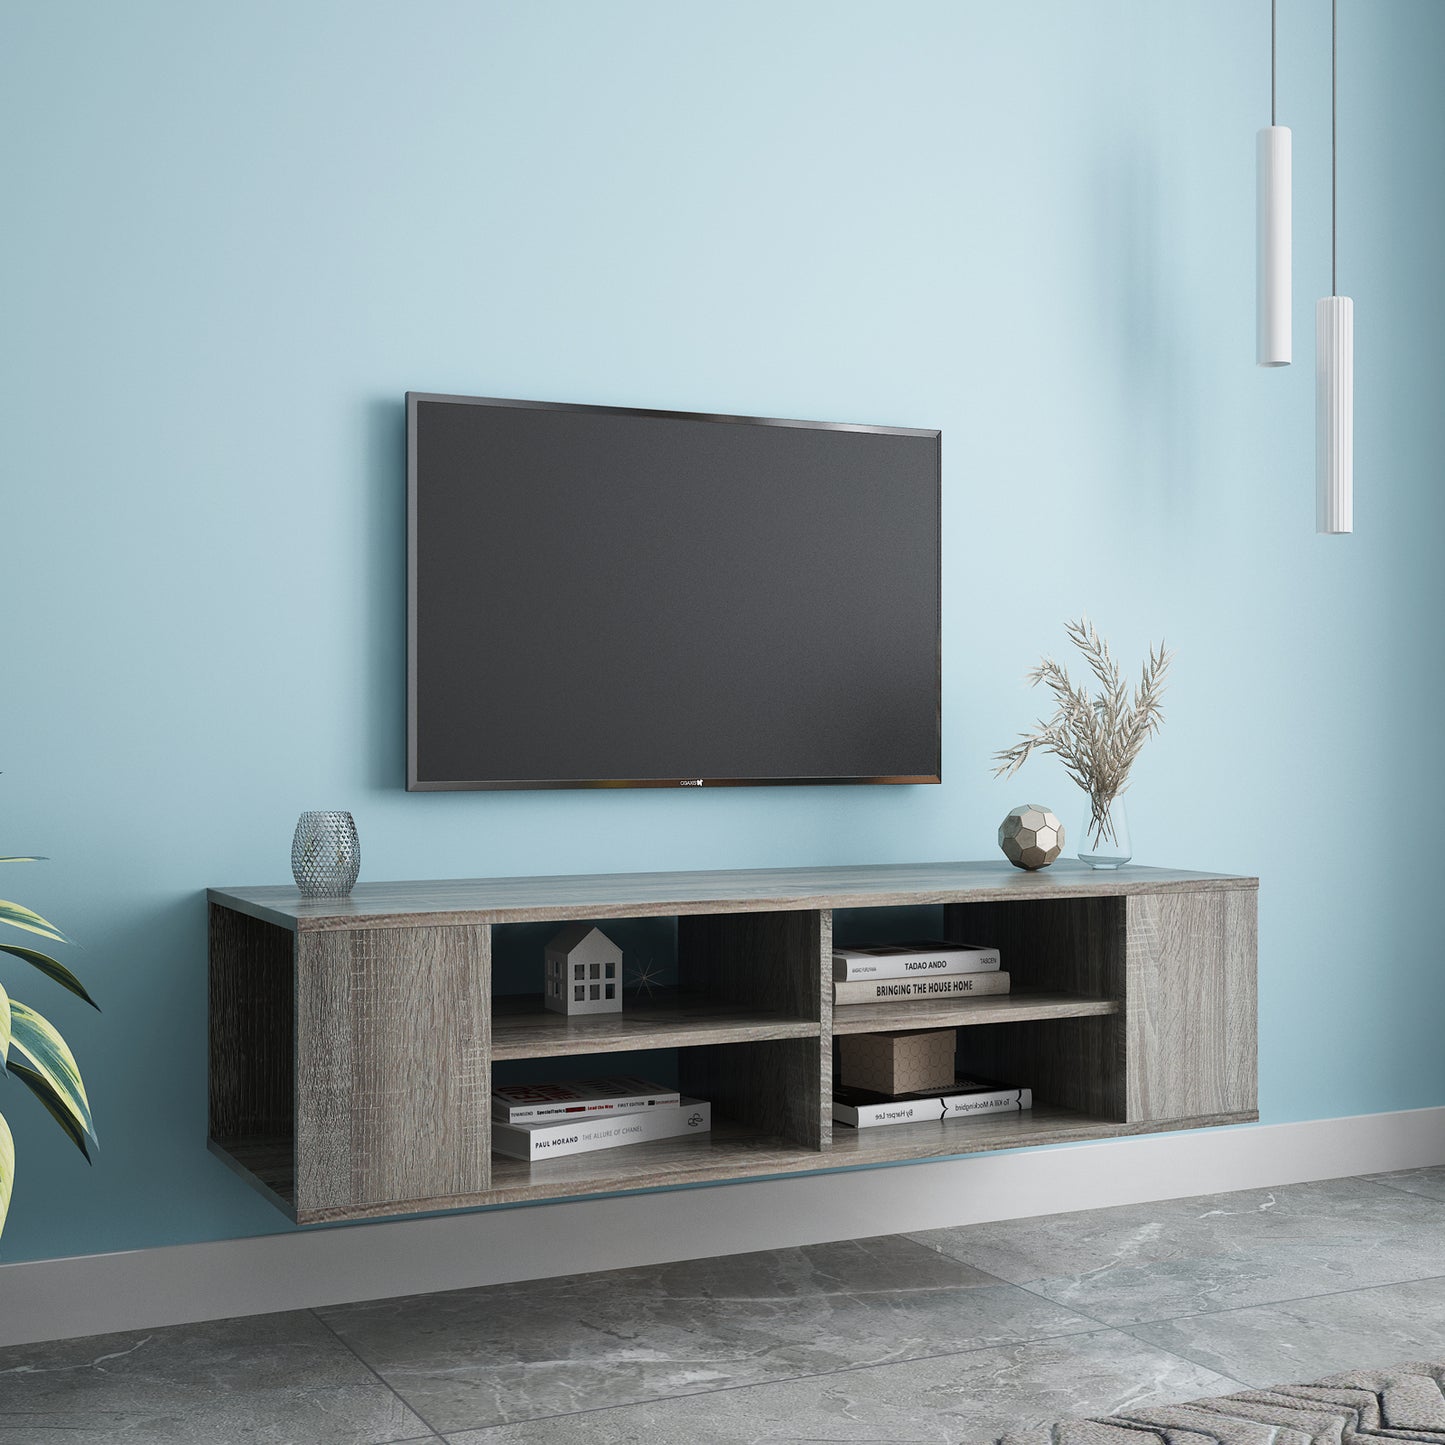 paproos Floating TV Stand, LJC